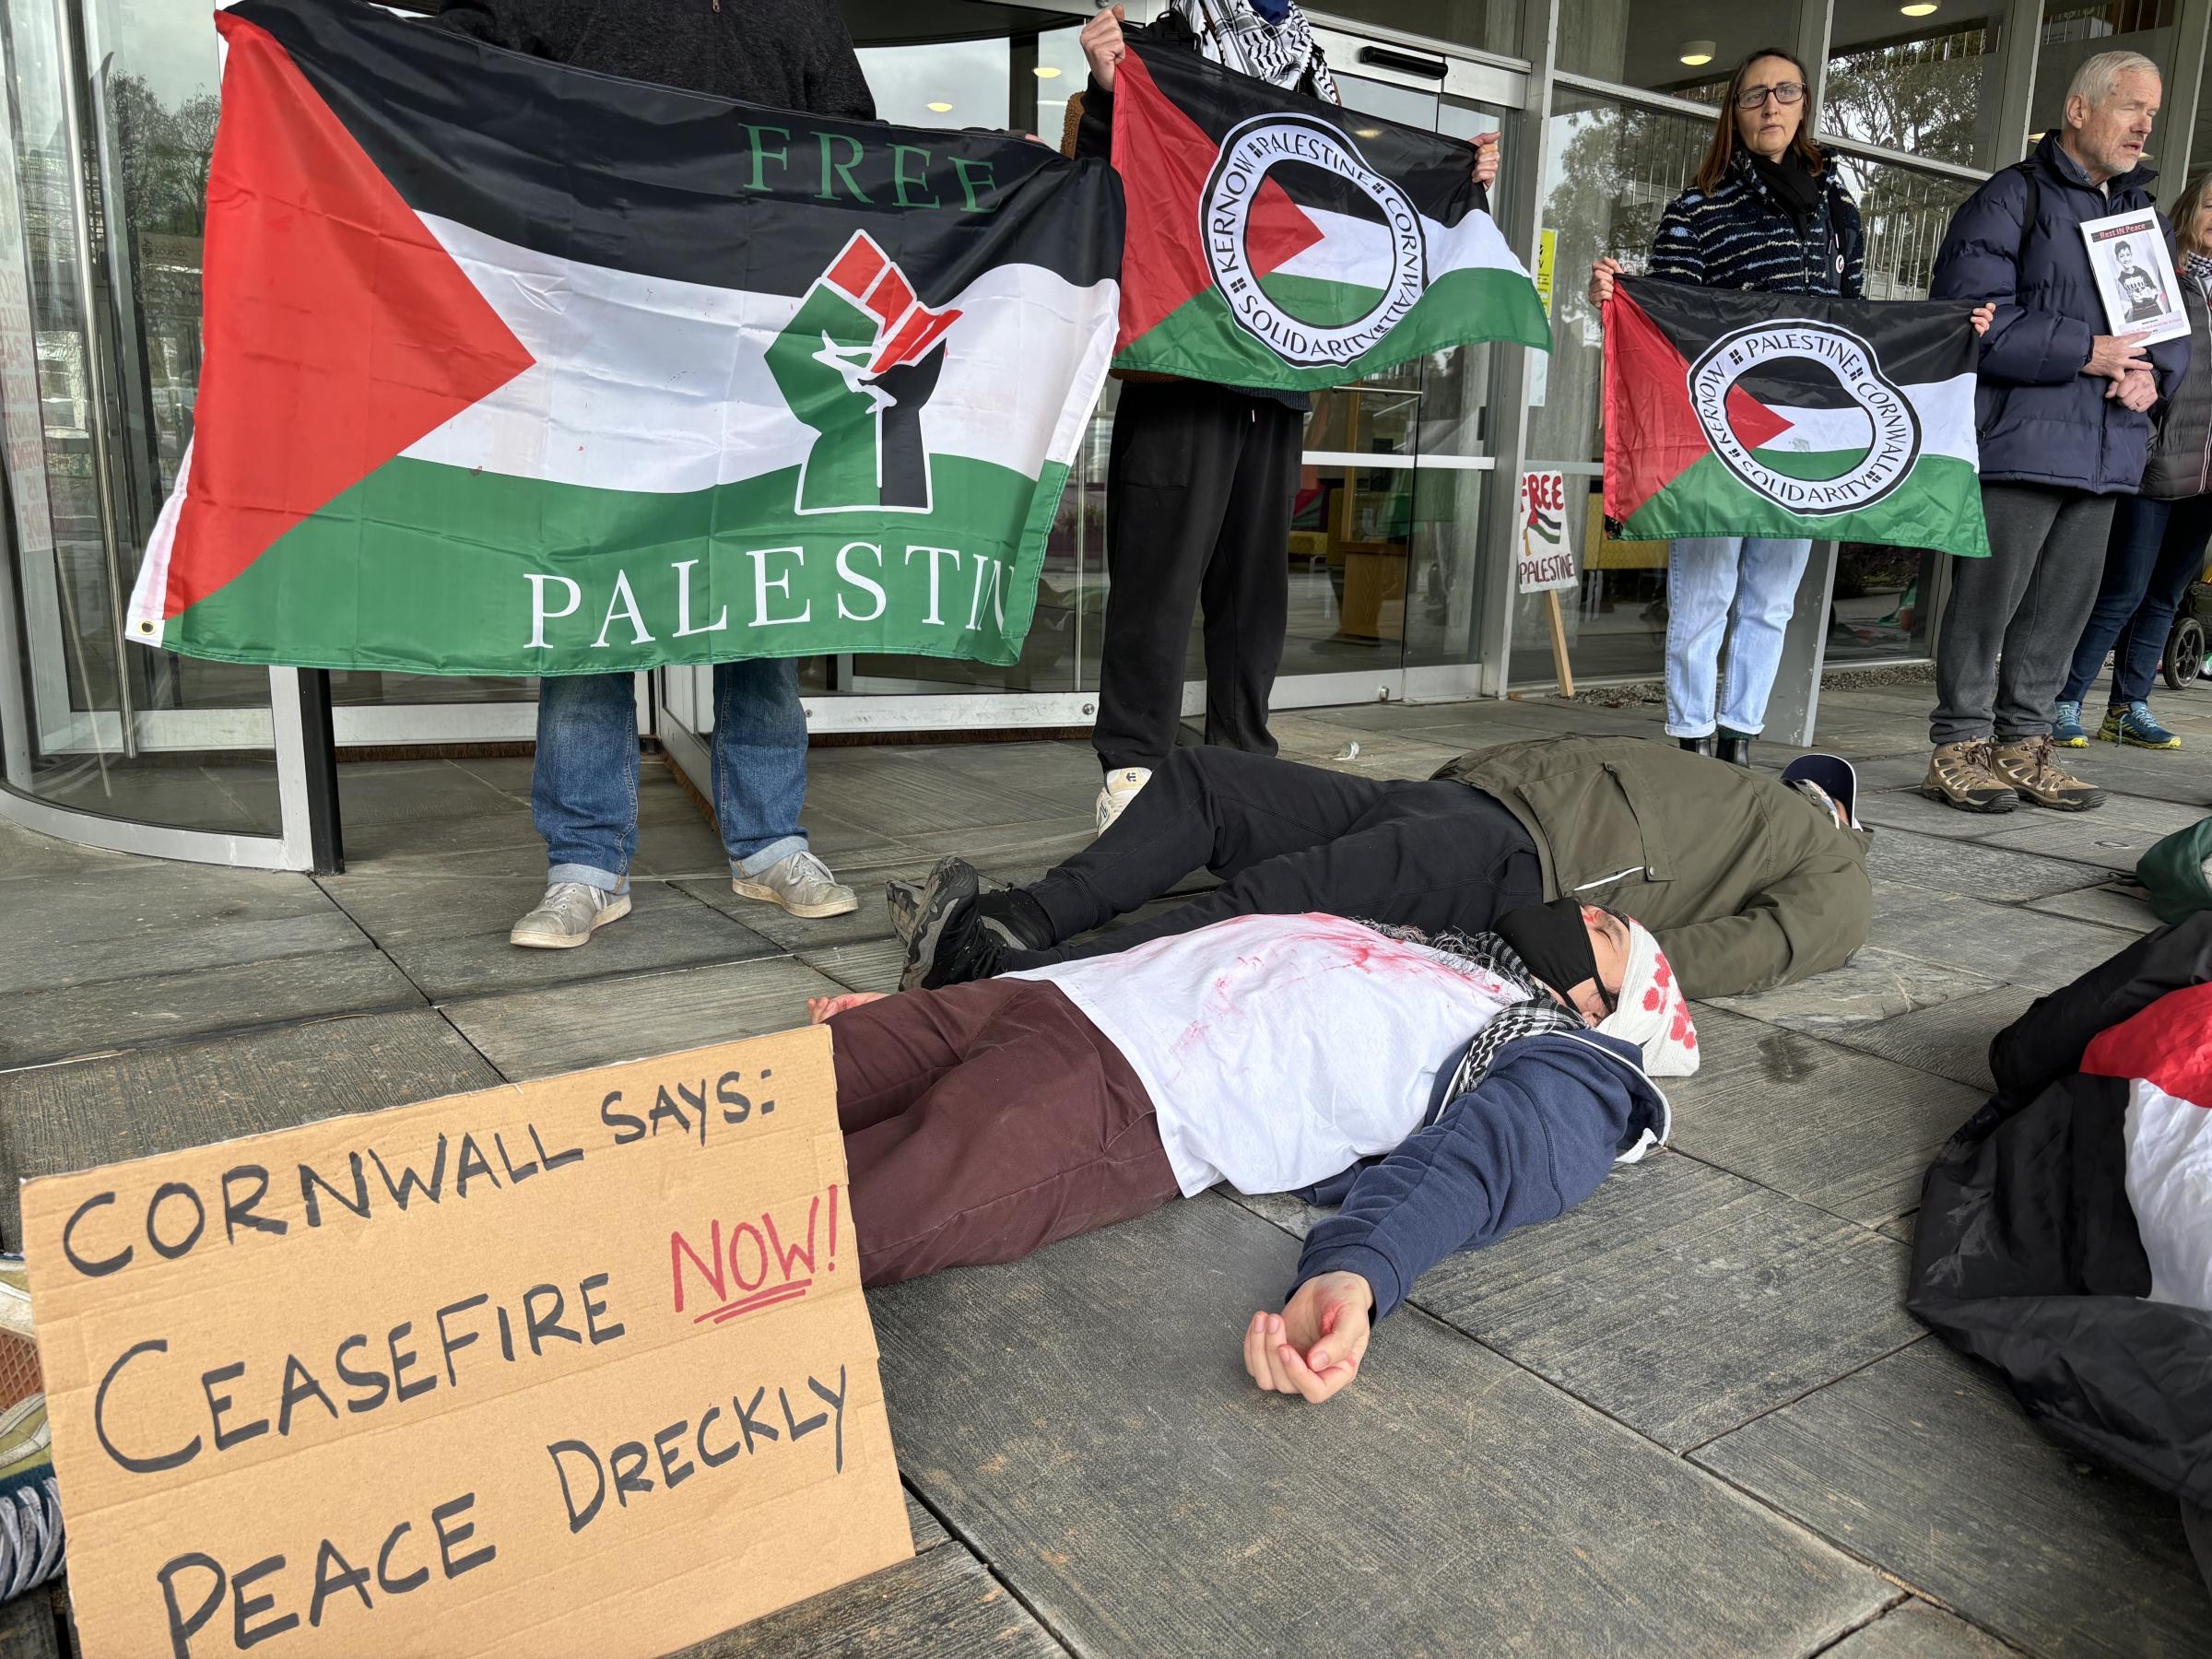 Members of Palestine Solidarity Cornwall protest outside County Hall (Lys Kernow) in Truro in February (Image: Lee Trewhela / LDRS)